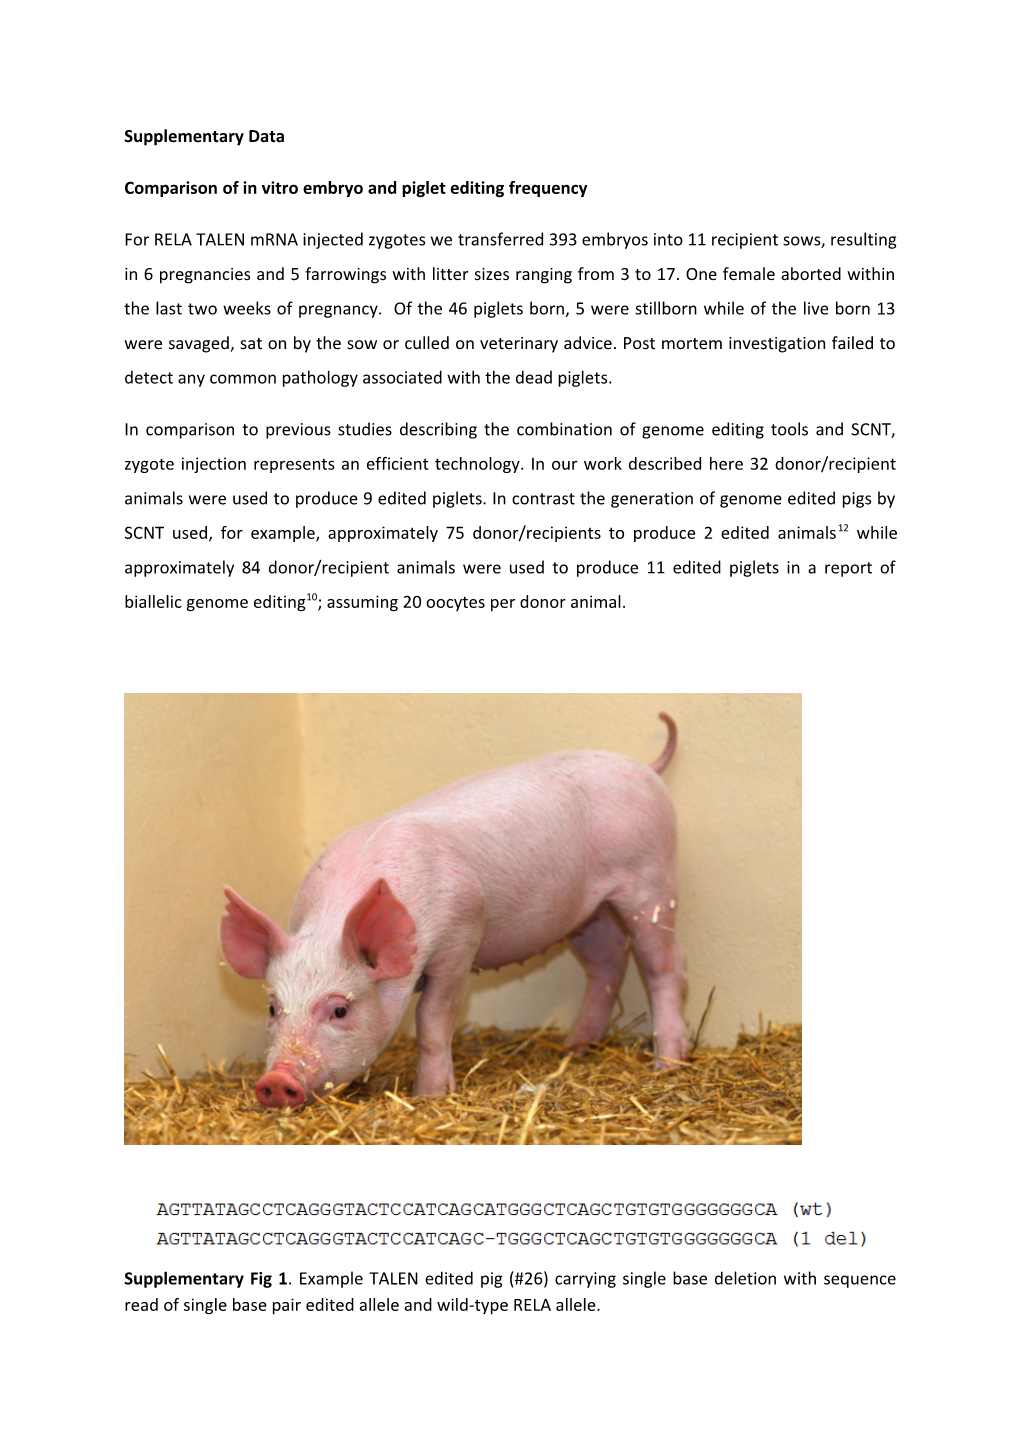 Comparison of in Vitro Embryo and Piglet Editing Frequency